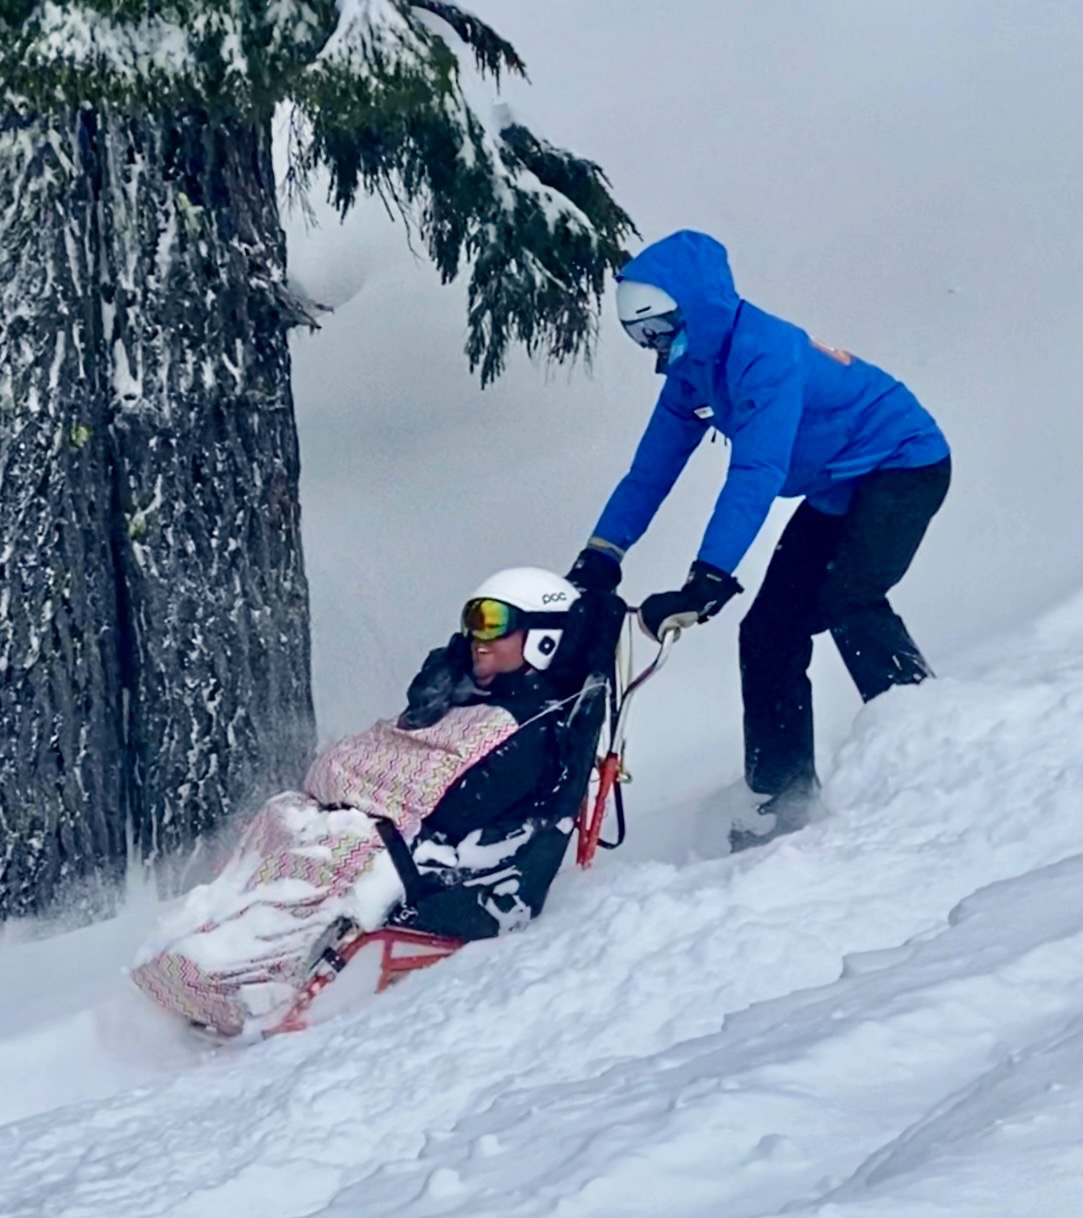 OAS instructor in a blue jacket bucketing Cory down a steep snowy terrain. Cory's smile is visible within all his winter layers and blanket from his sit ski.